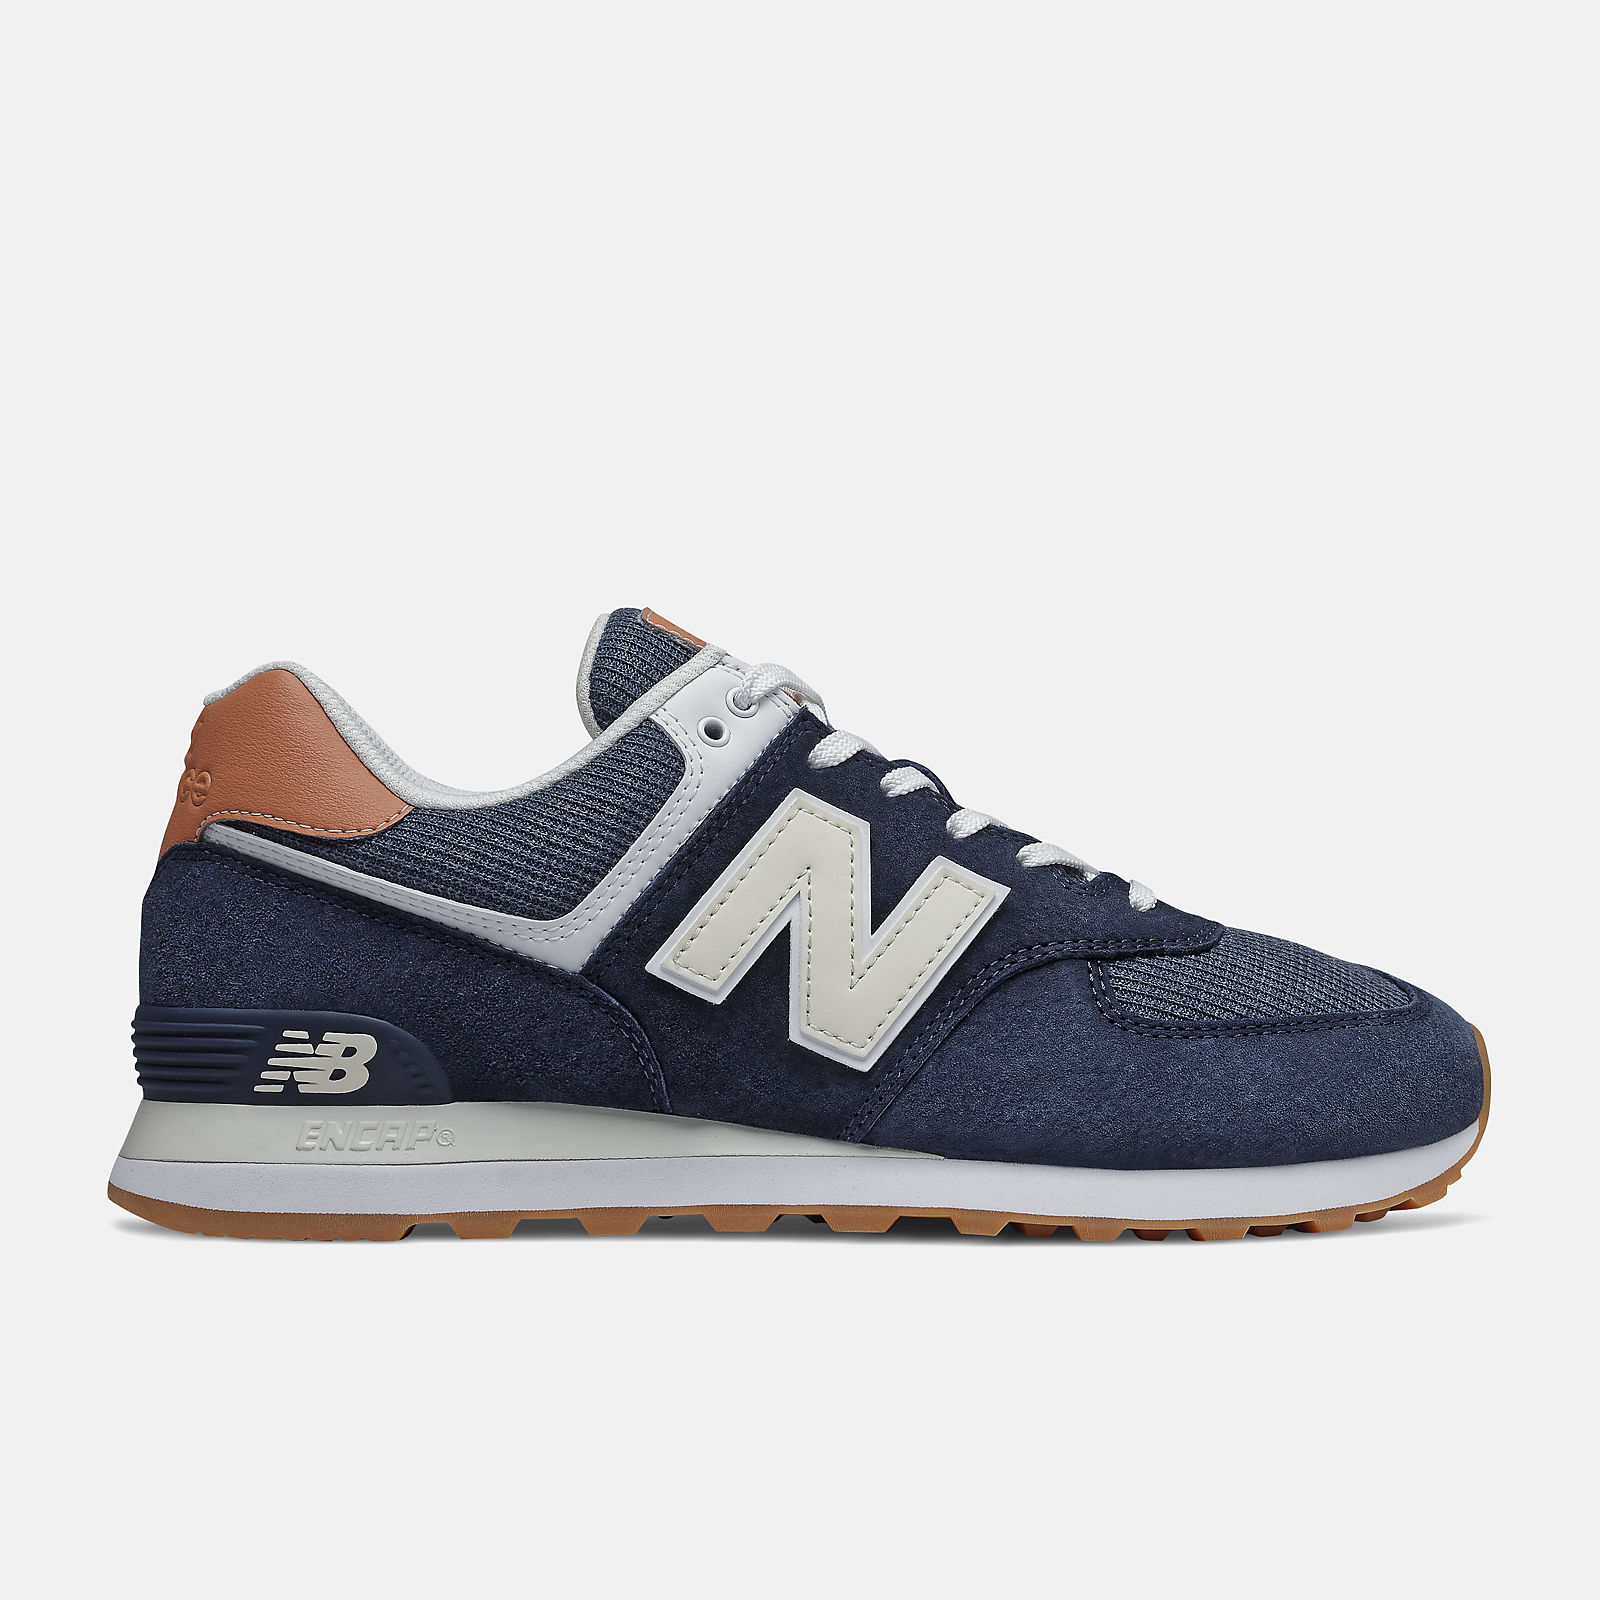 Chaussures 574 Lifestyle Homme - New Balance